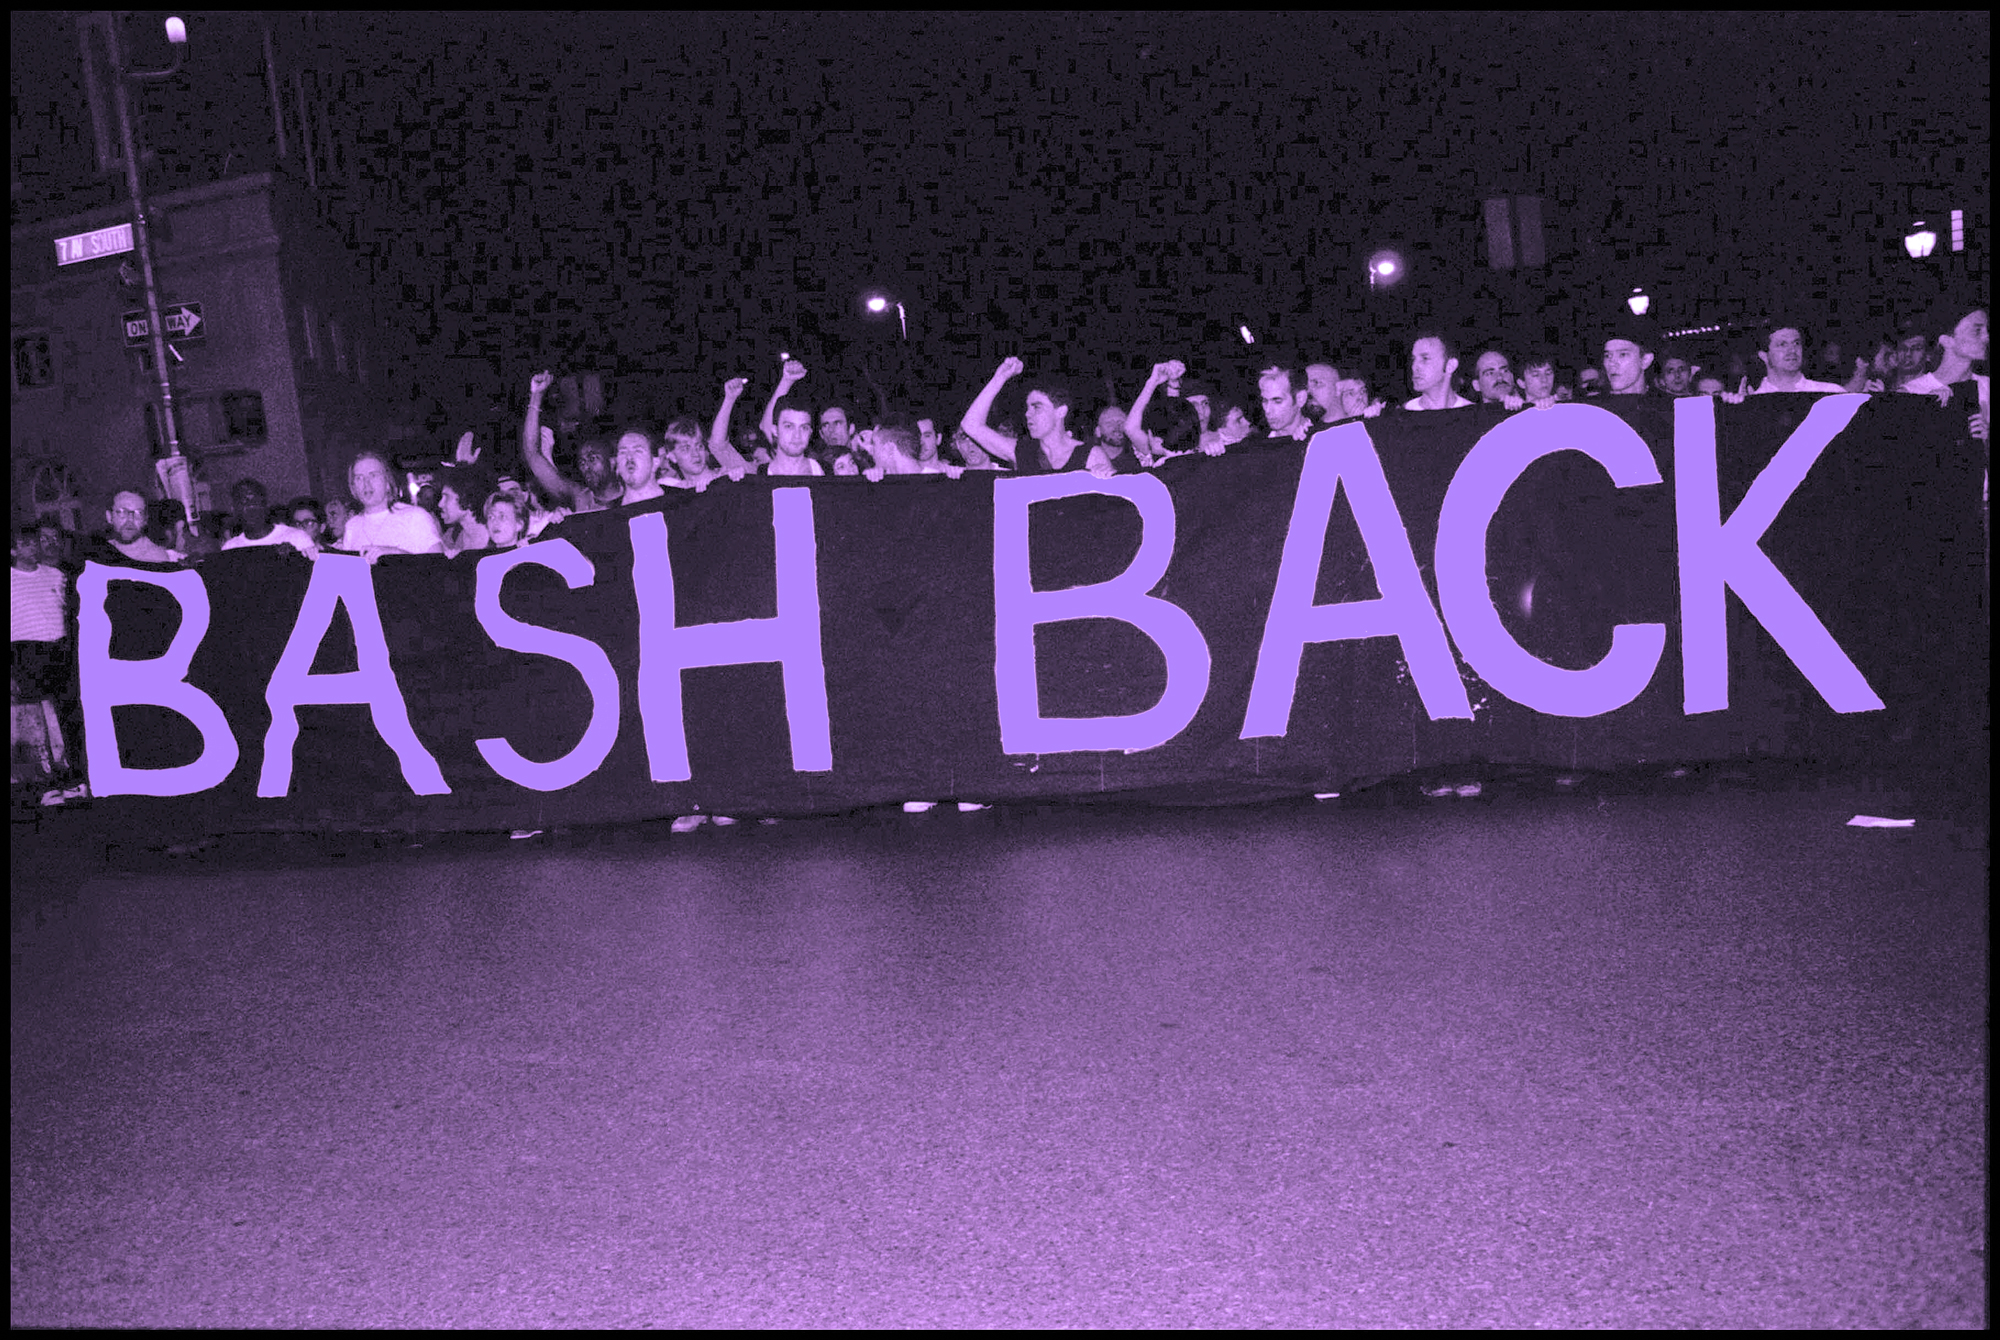 Bash Back! Is Back: Reviving an Insurrectionary Queer Network (An Interview)